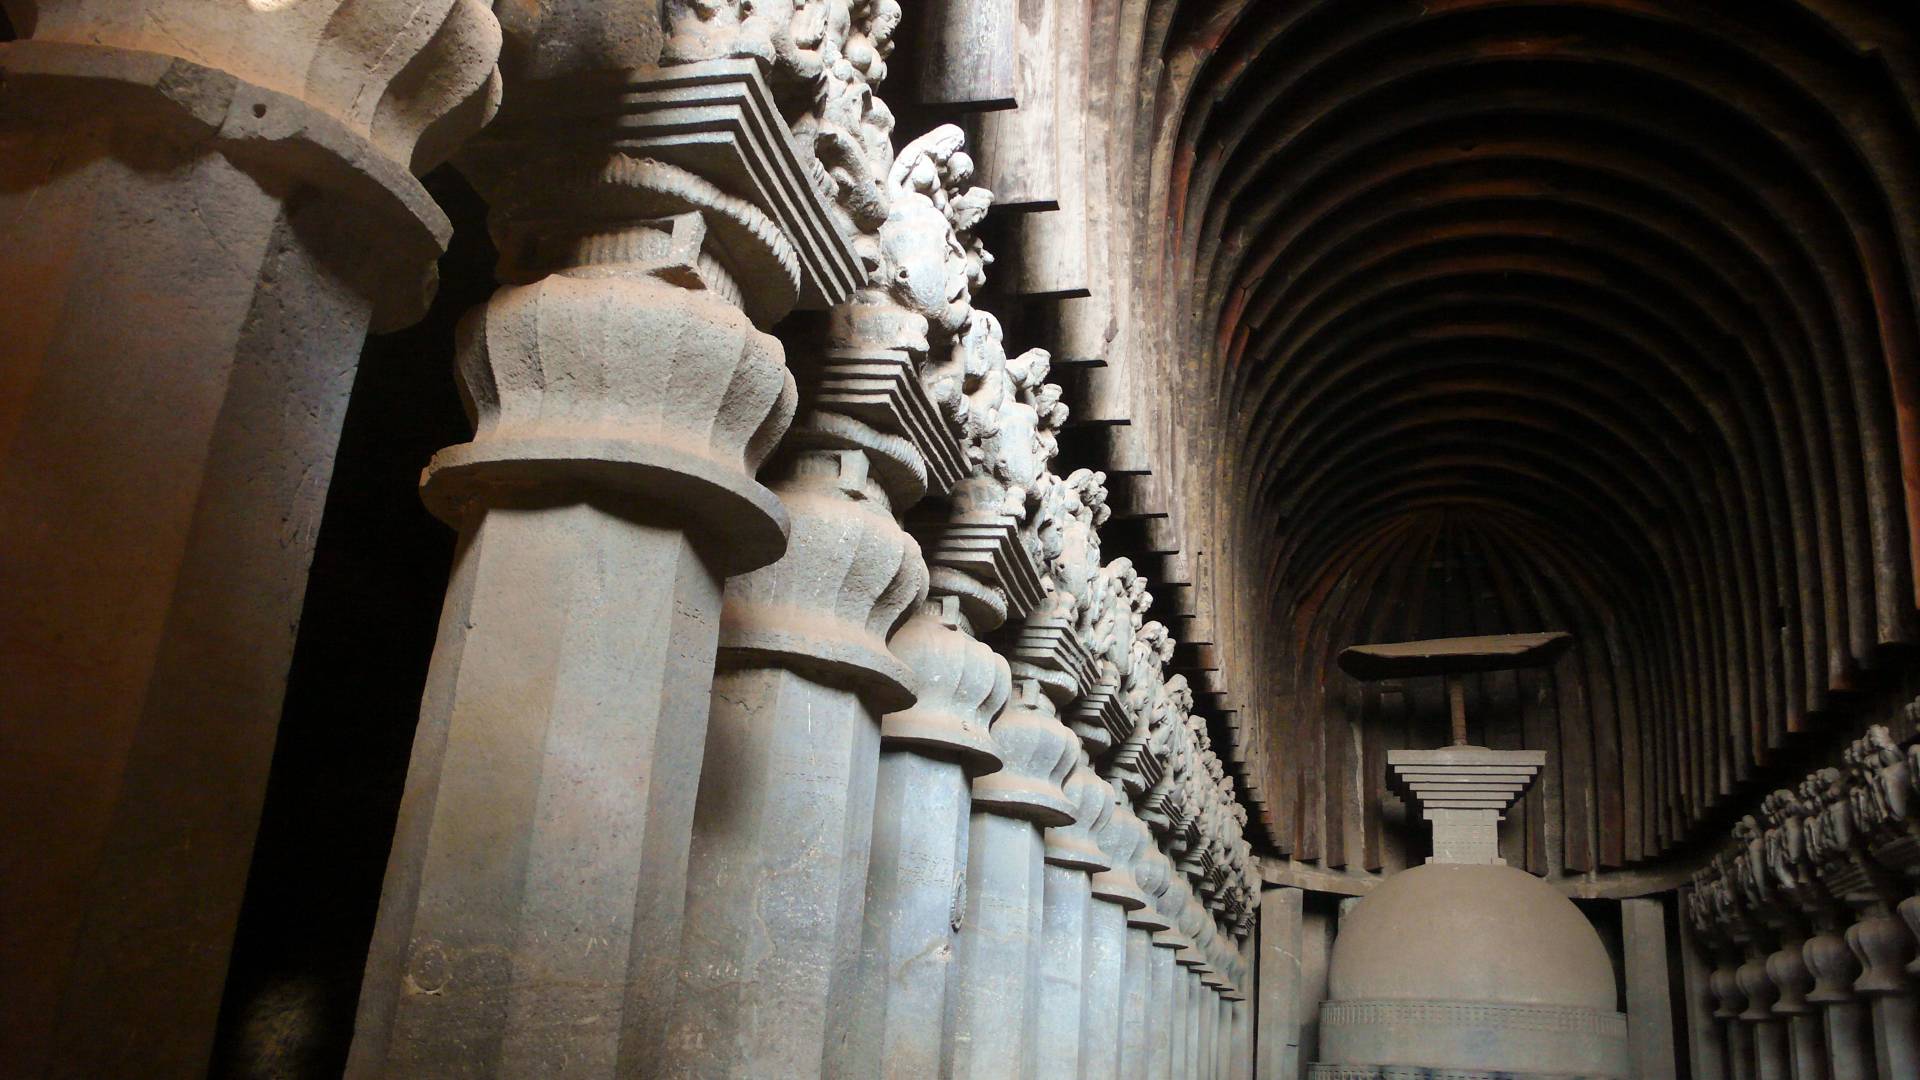 Columns from old temple in India